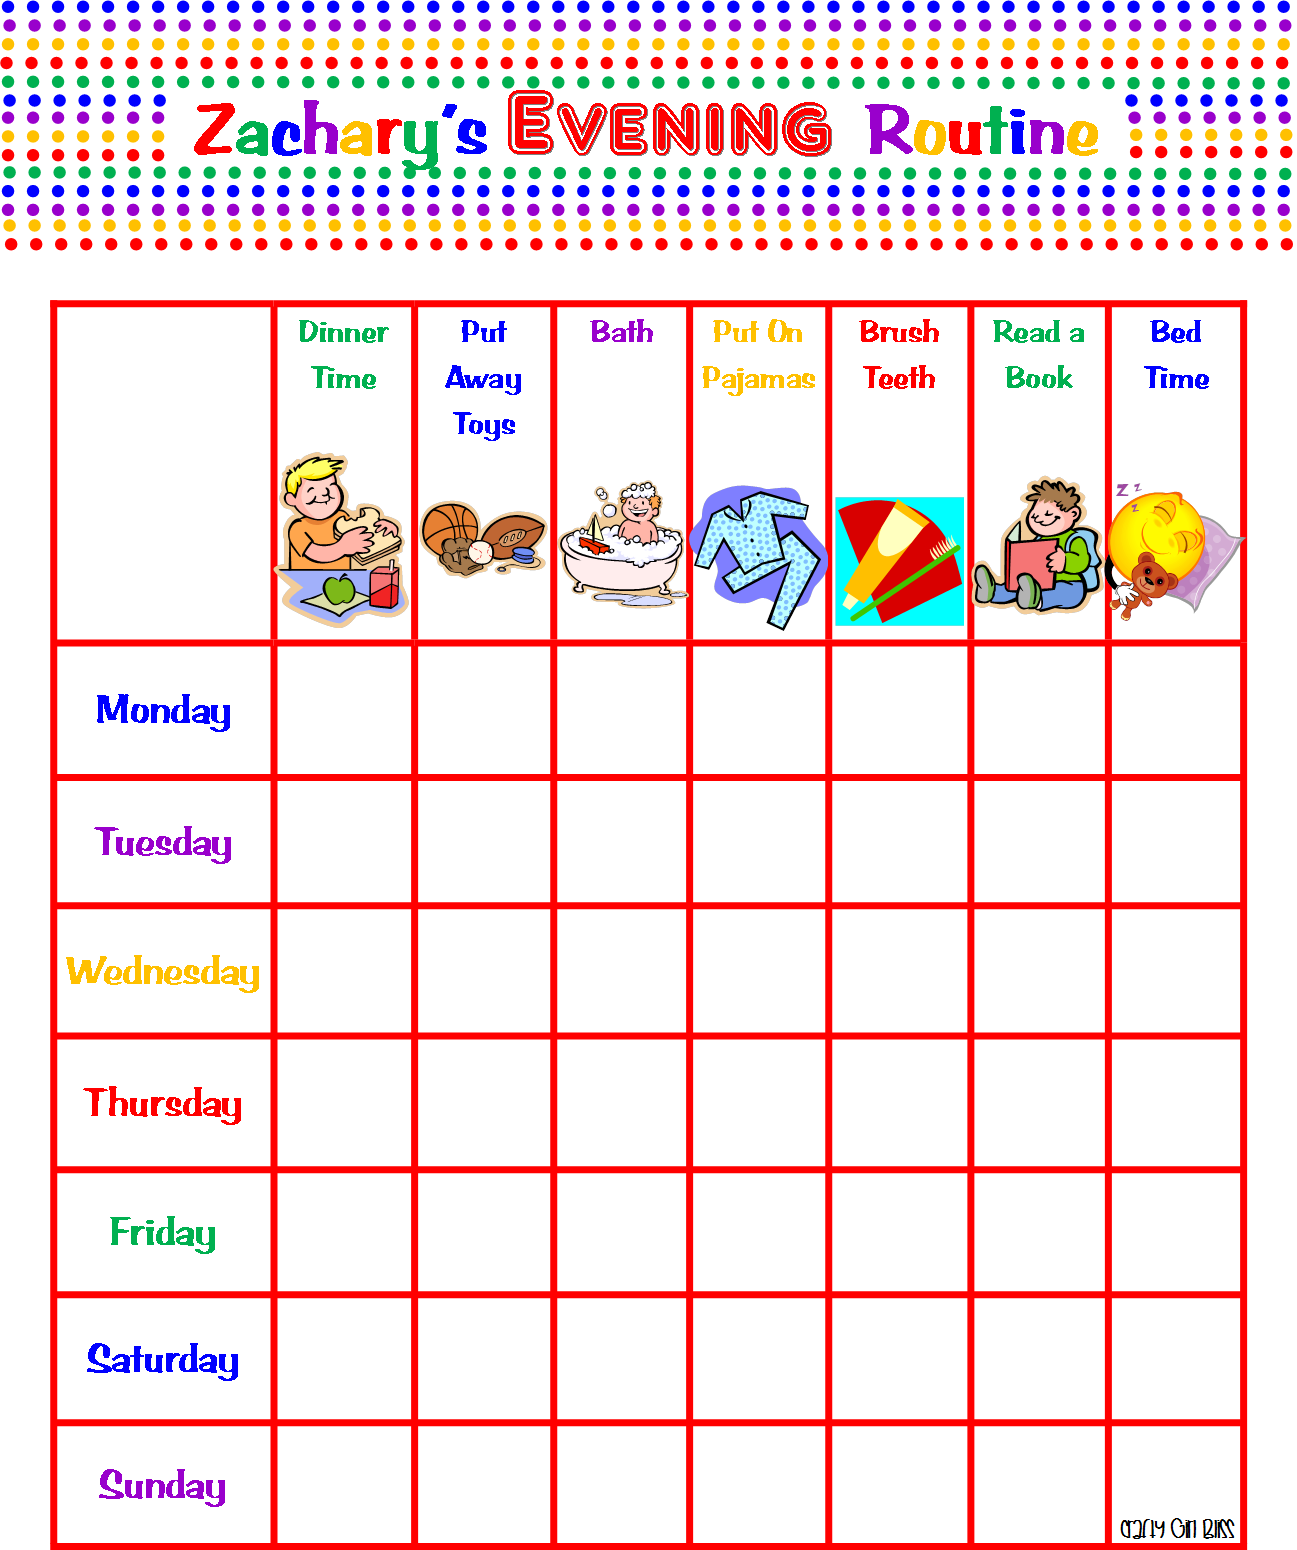 crafty-girl-bliss-morning-evening-routine-charts-for-my-2-year-old